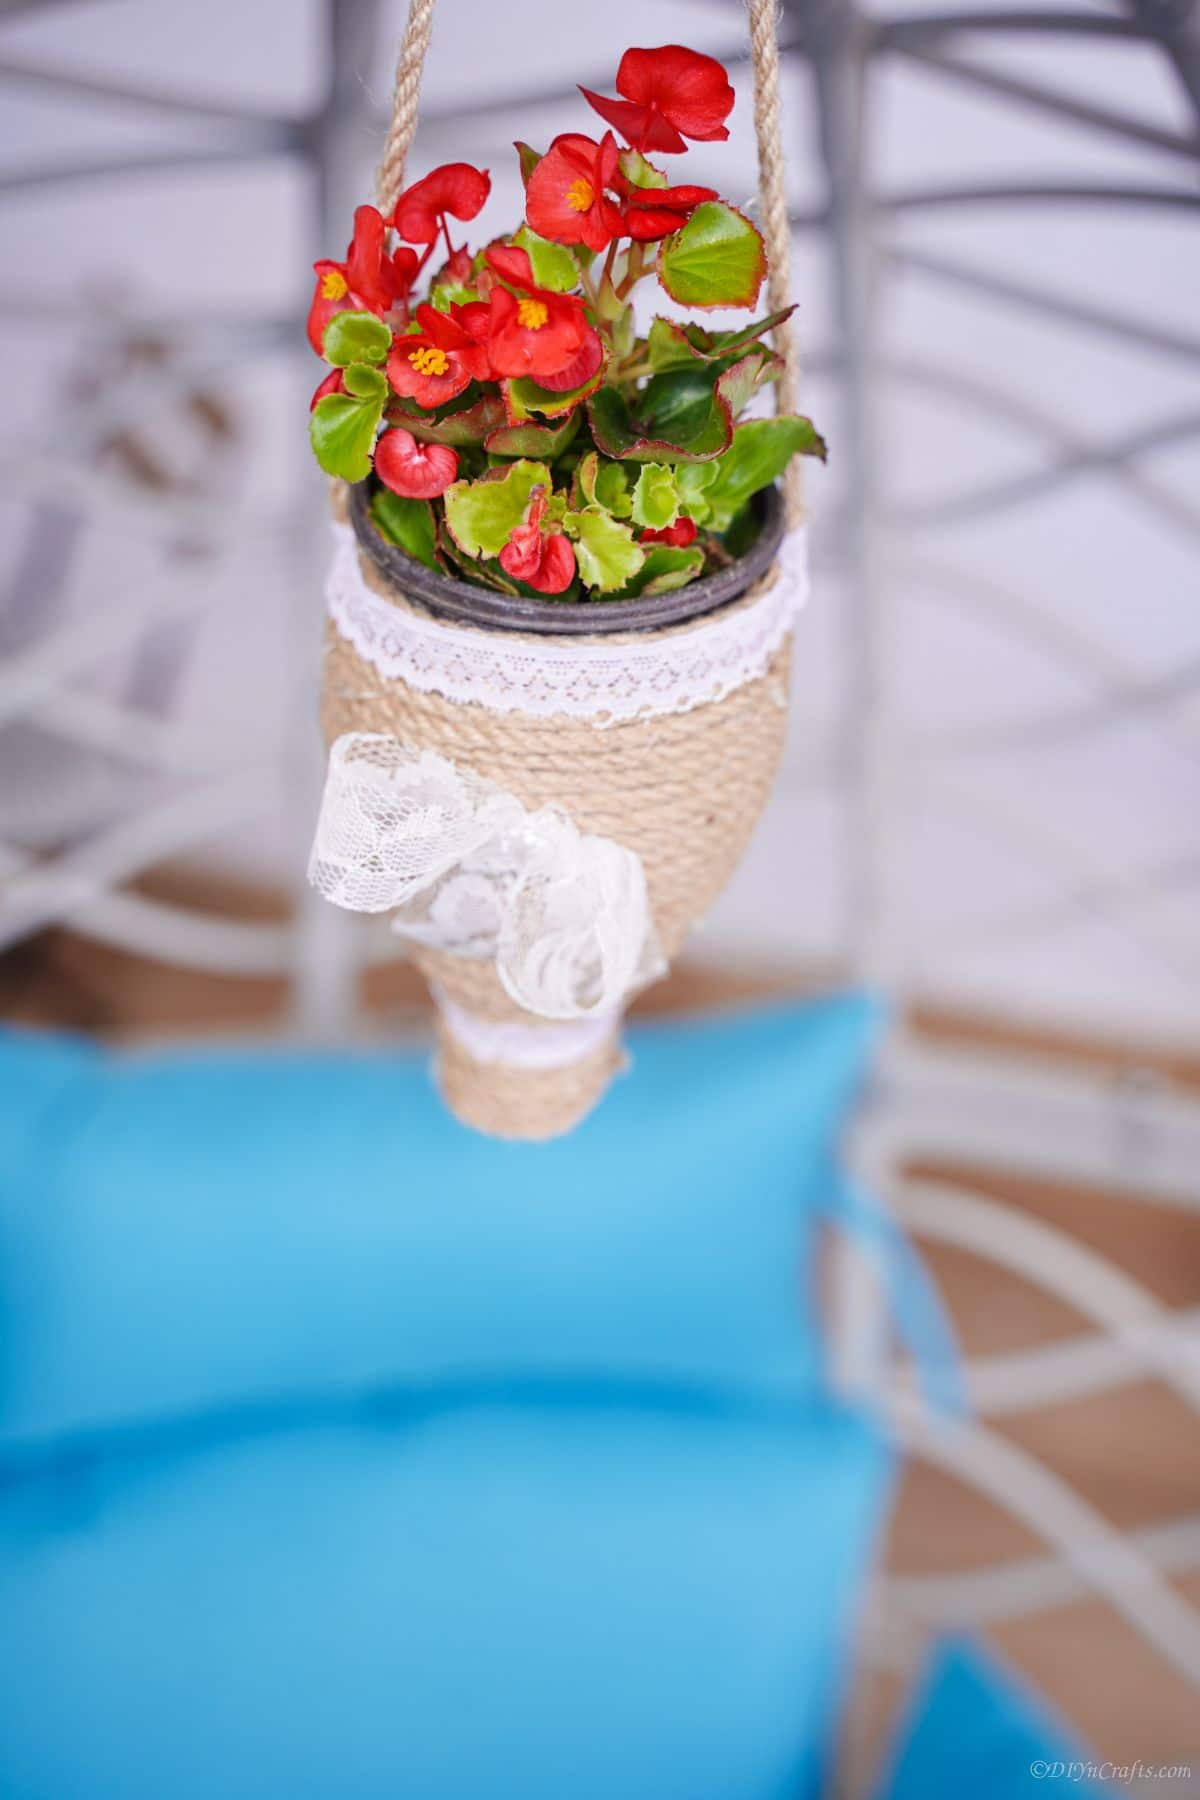 planter flowers hanging on white wicker chair with blue pillow